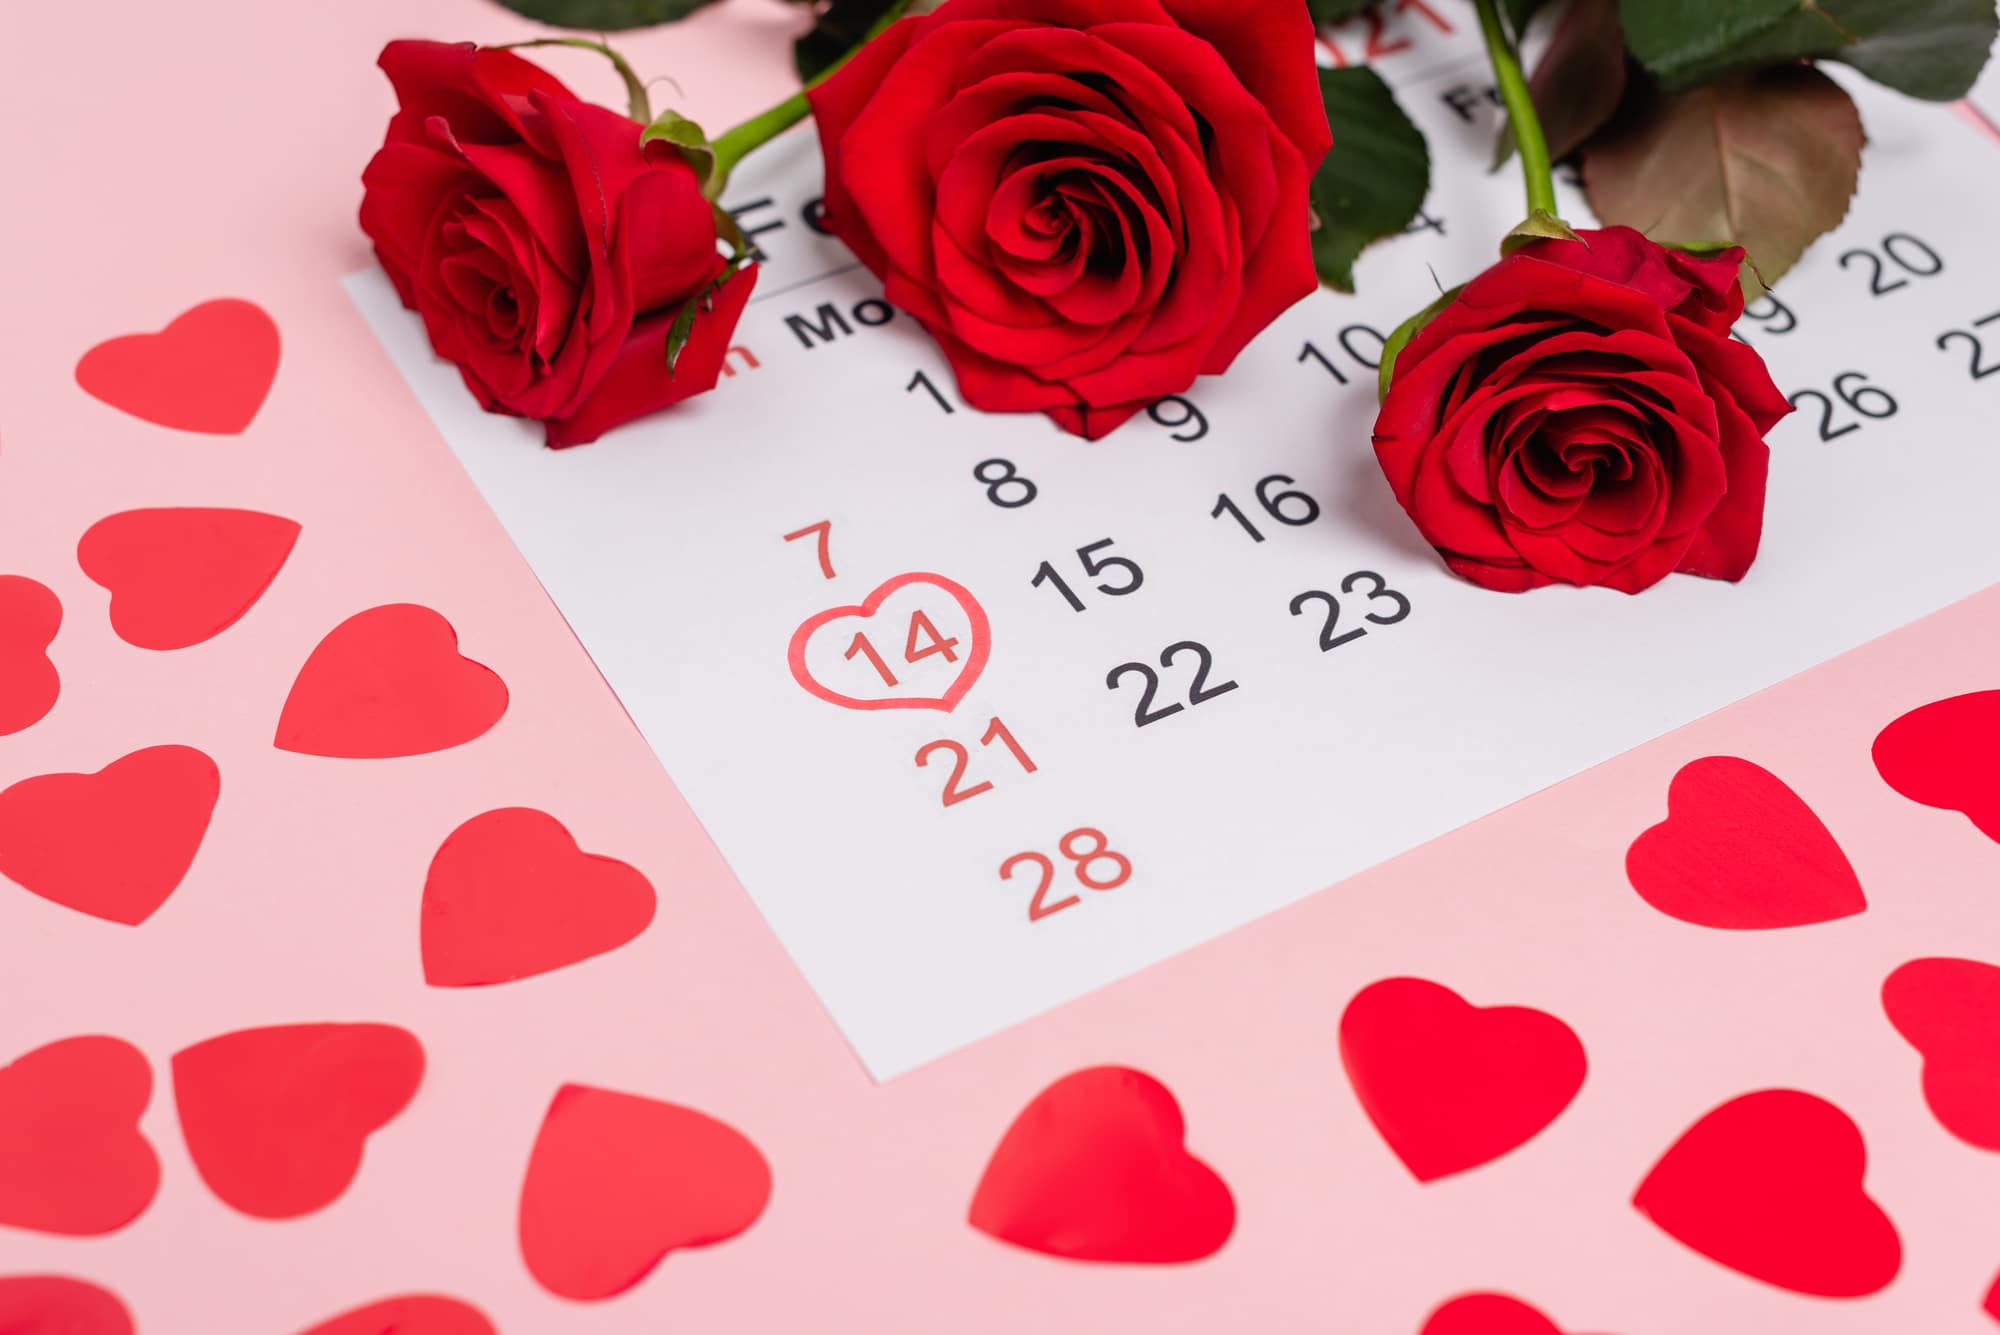 February calendar with hearts and roses on pink background